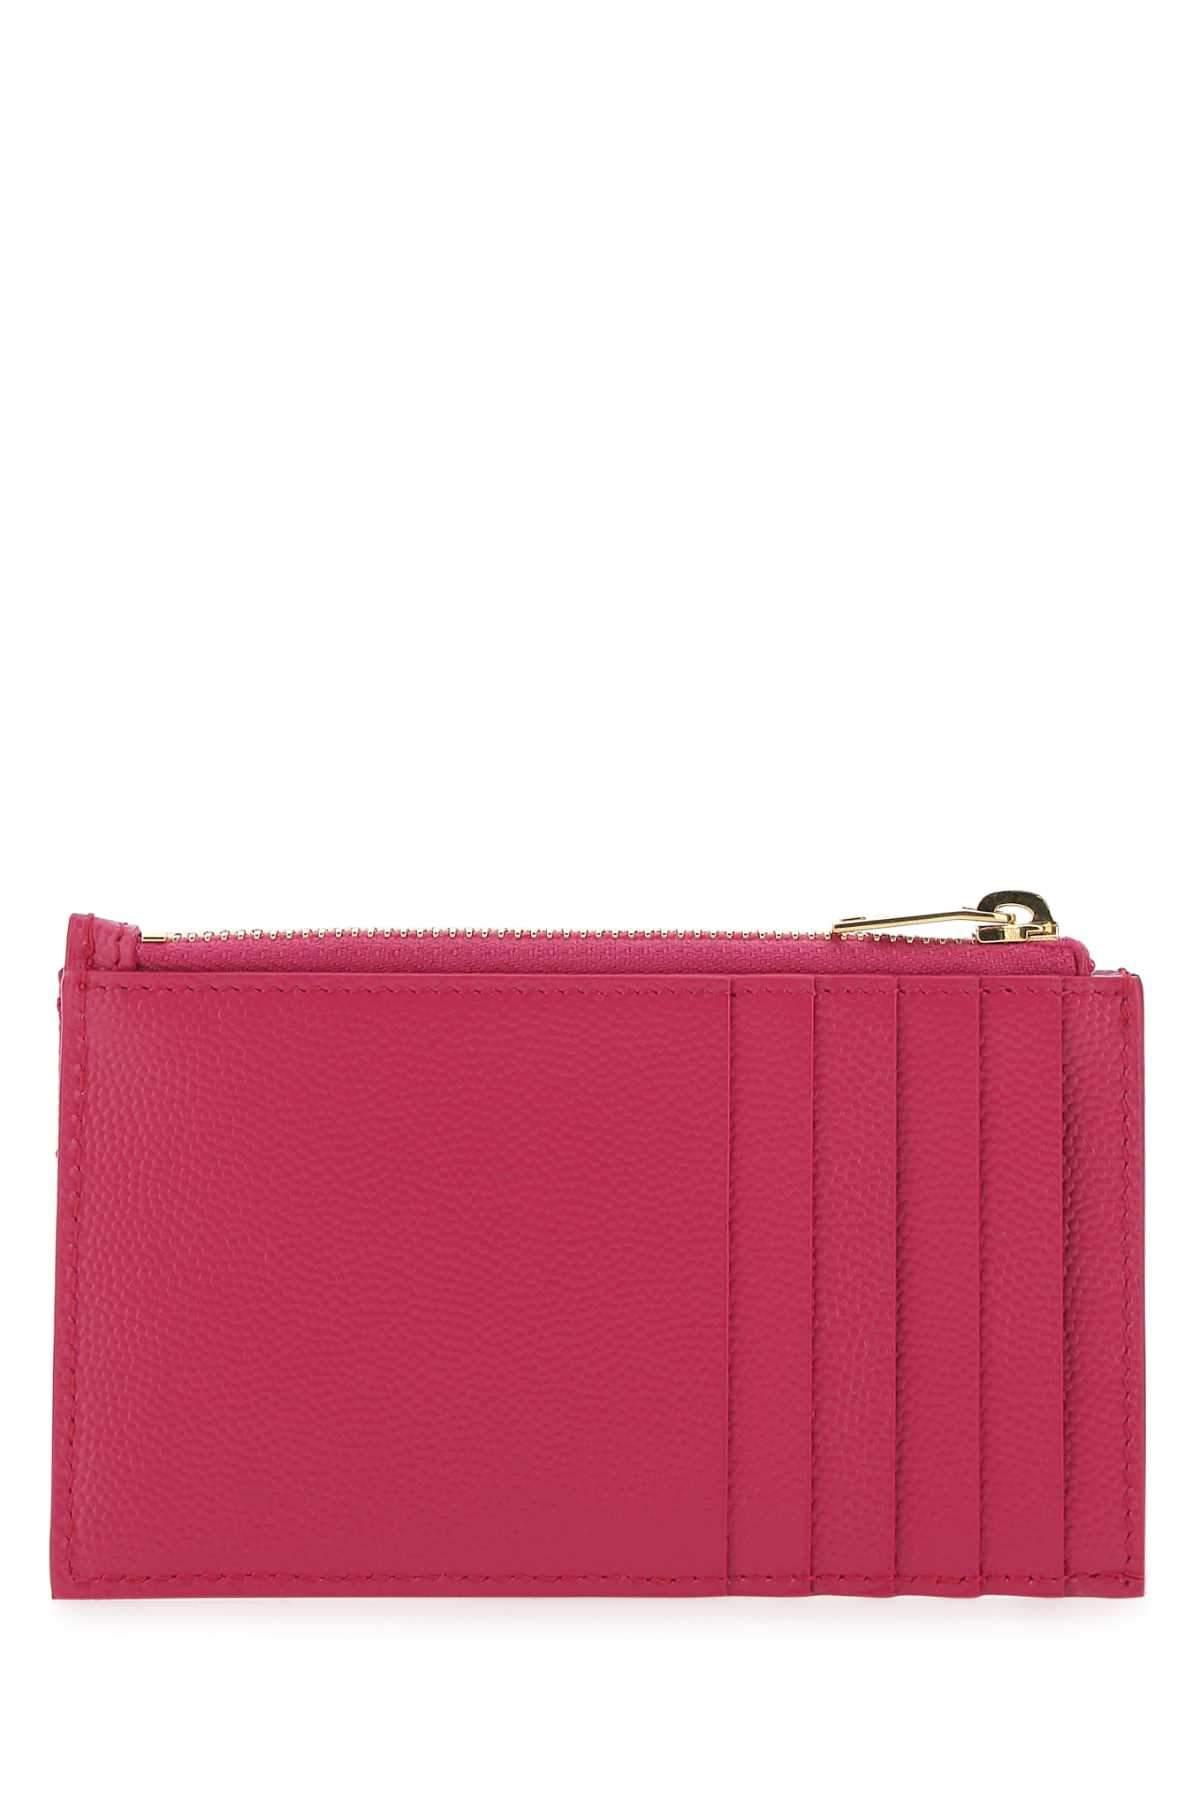 Card Holder  Buy Womens Card Holders Online Australia- THE ICONIC